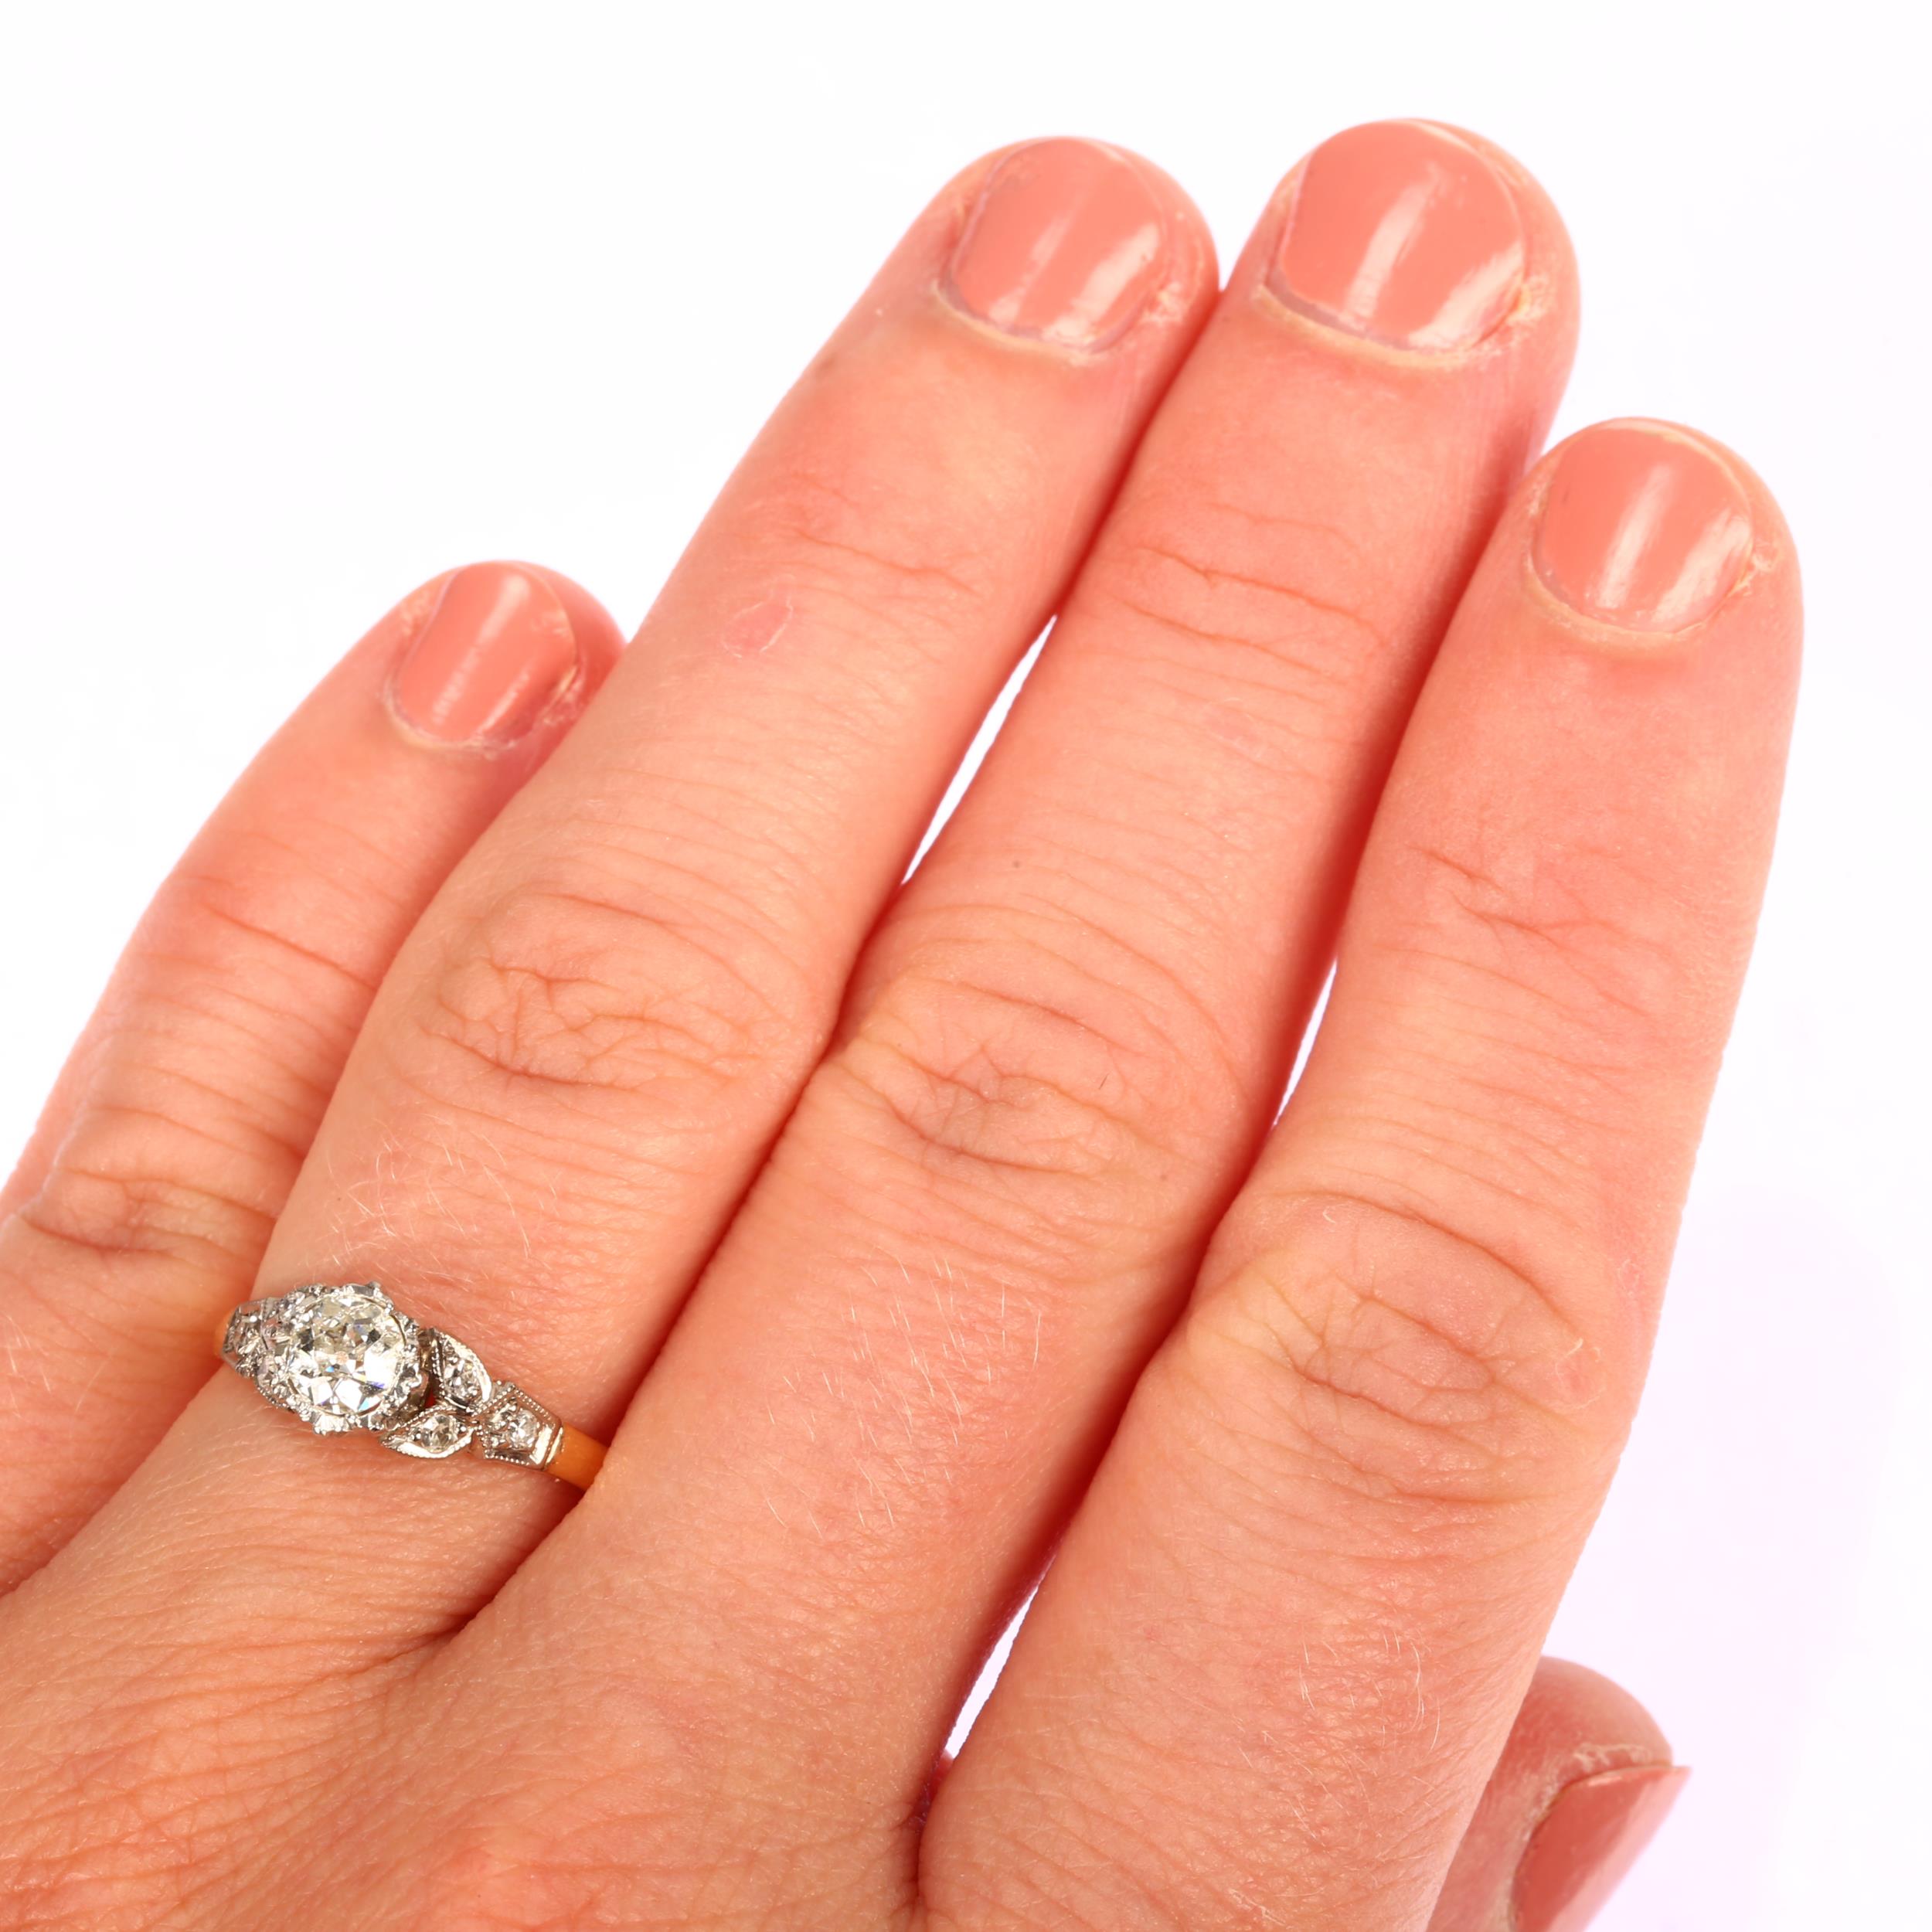 An 18ct gold 0.3ct solitaire diamond ring, platinum-topped illusion set with old European-cut - Image 4 of 4